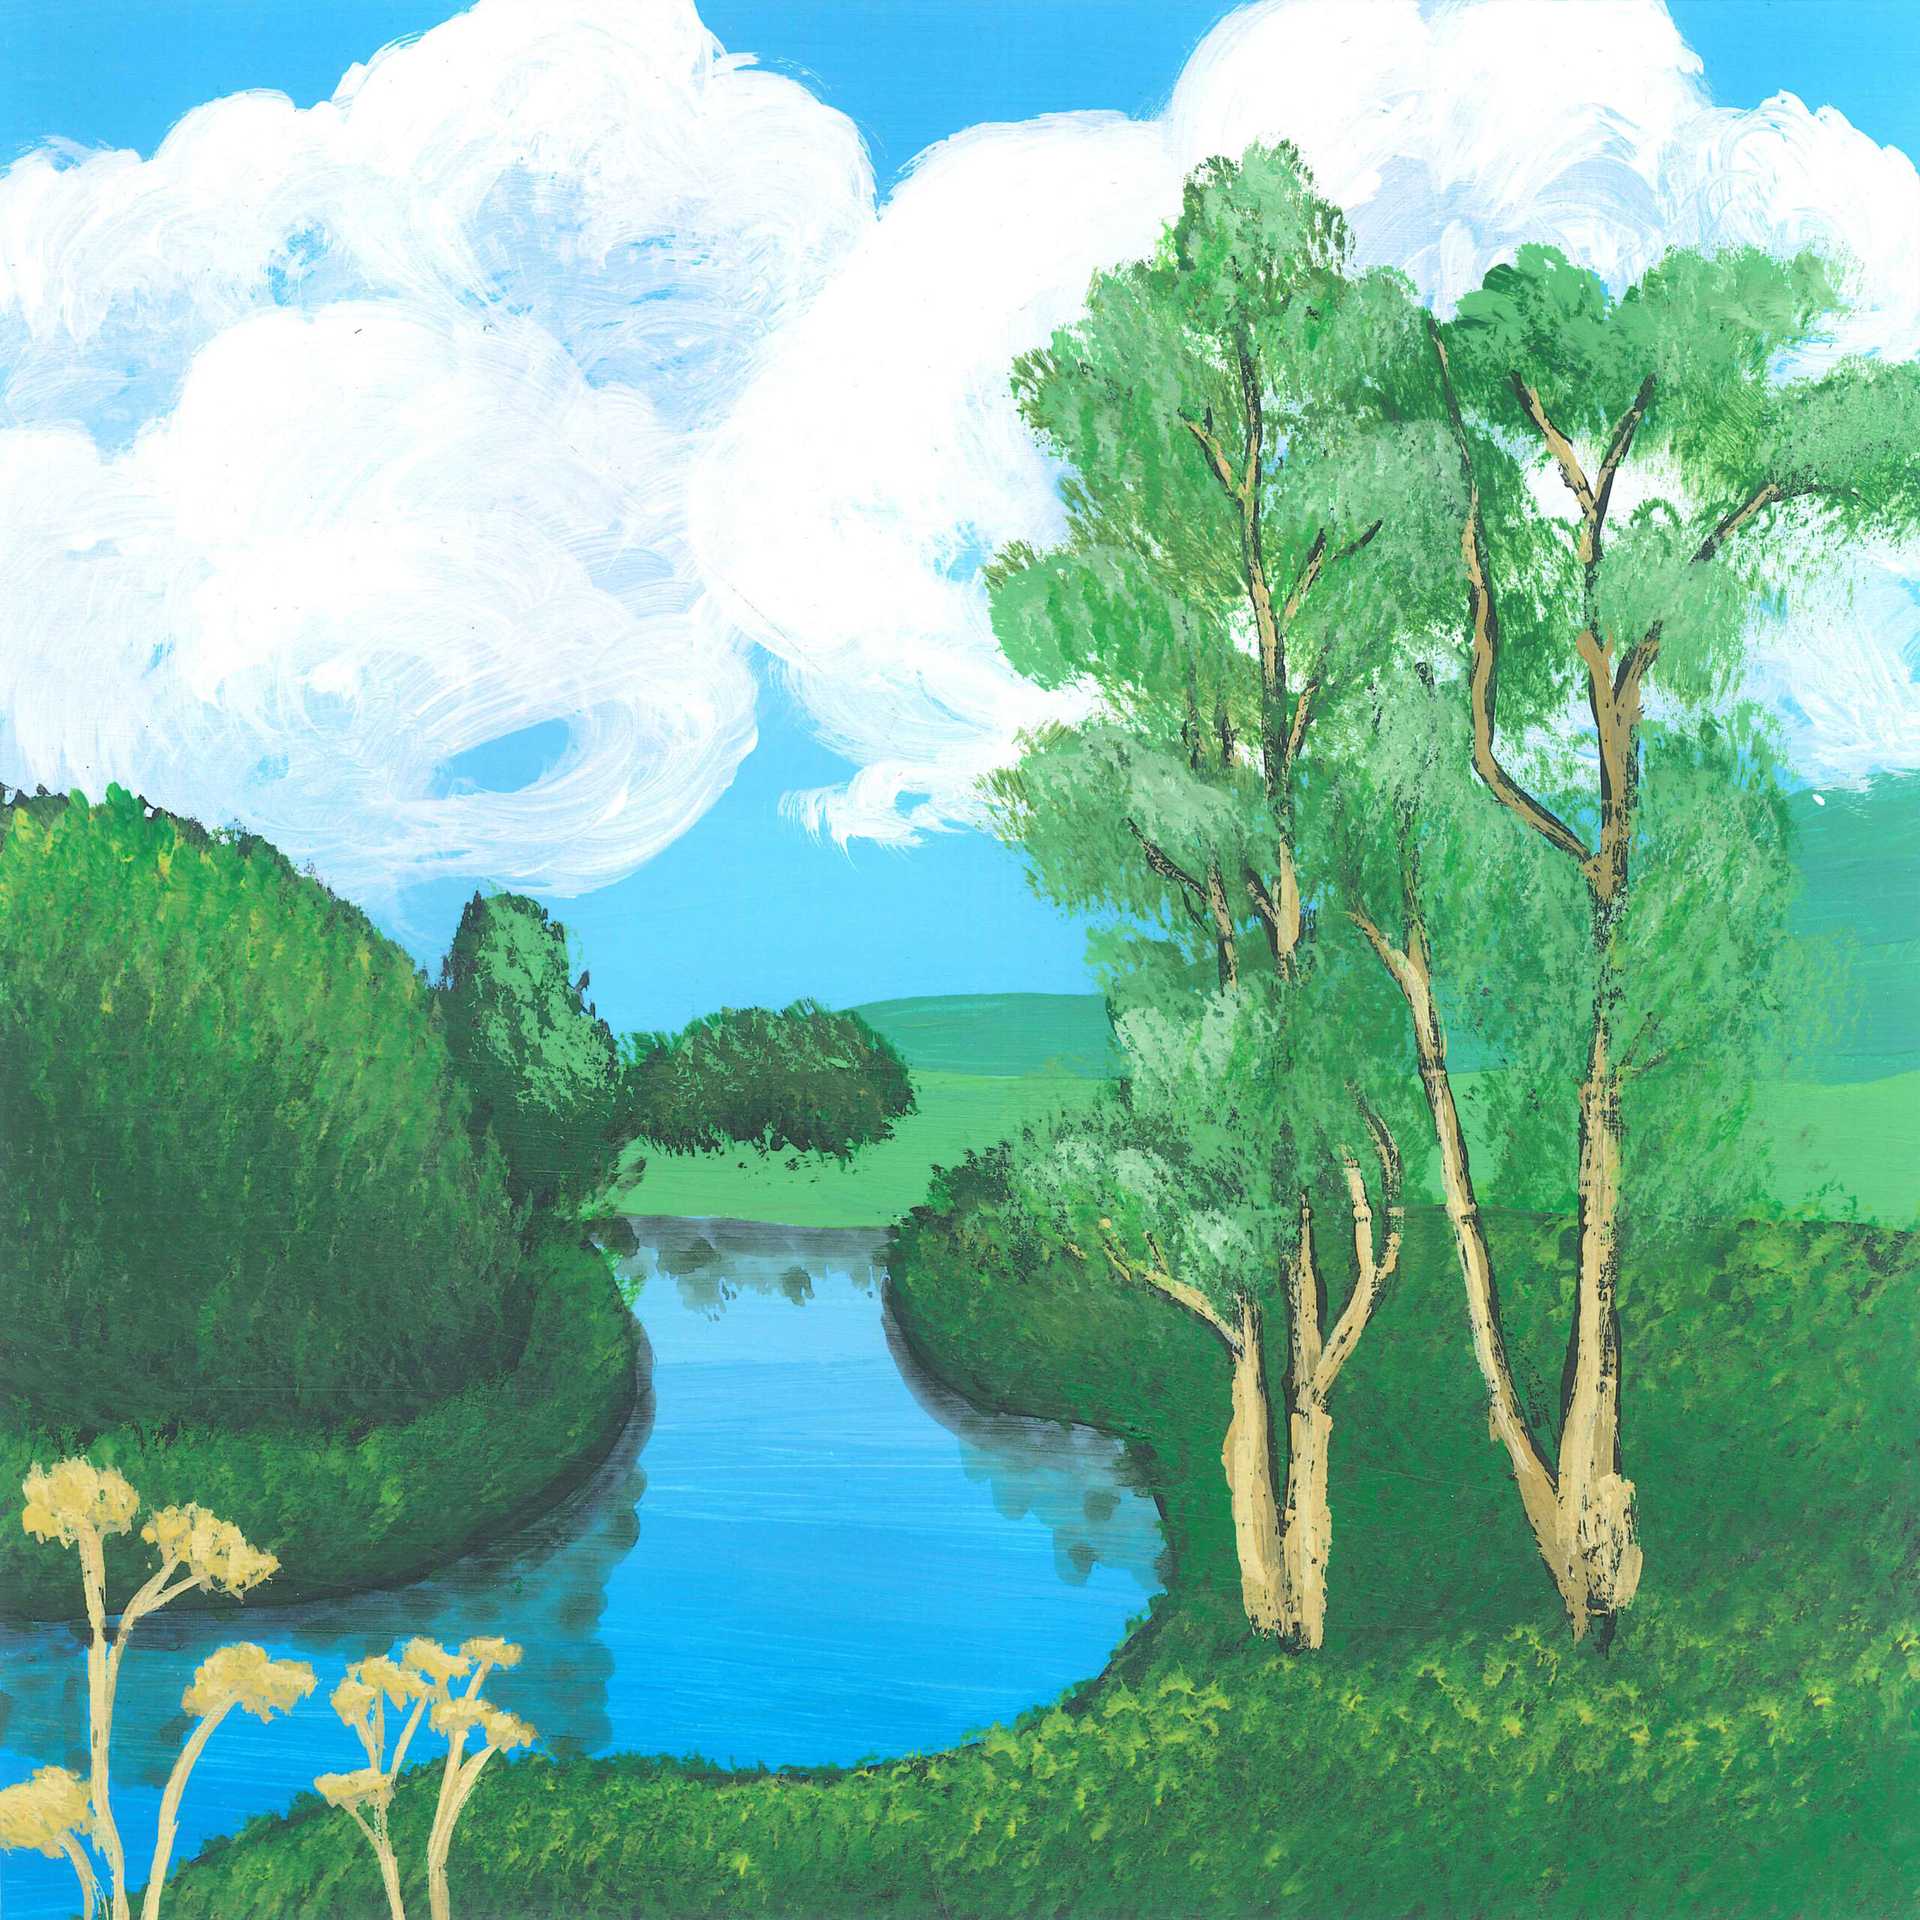 Crook in the River - nature landscape painting - earth.fm